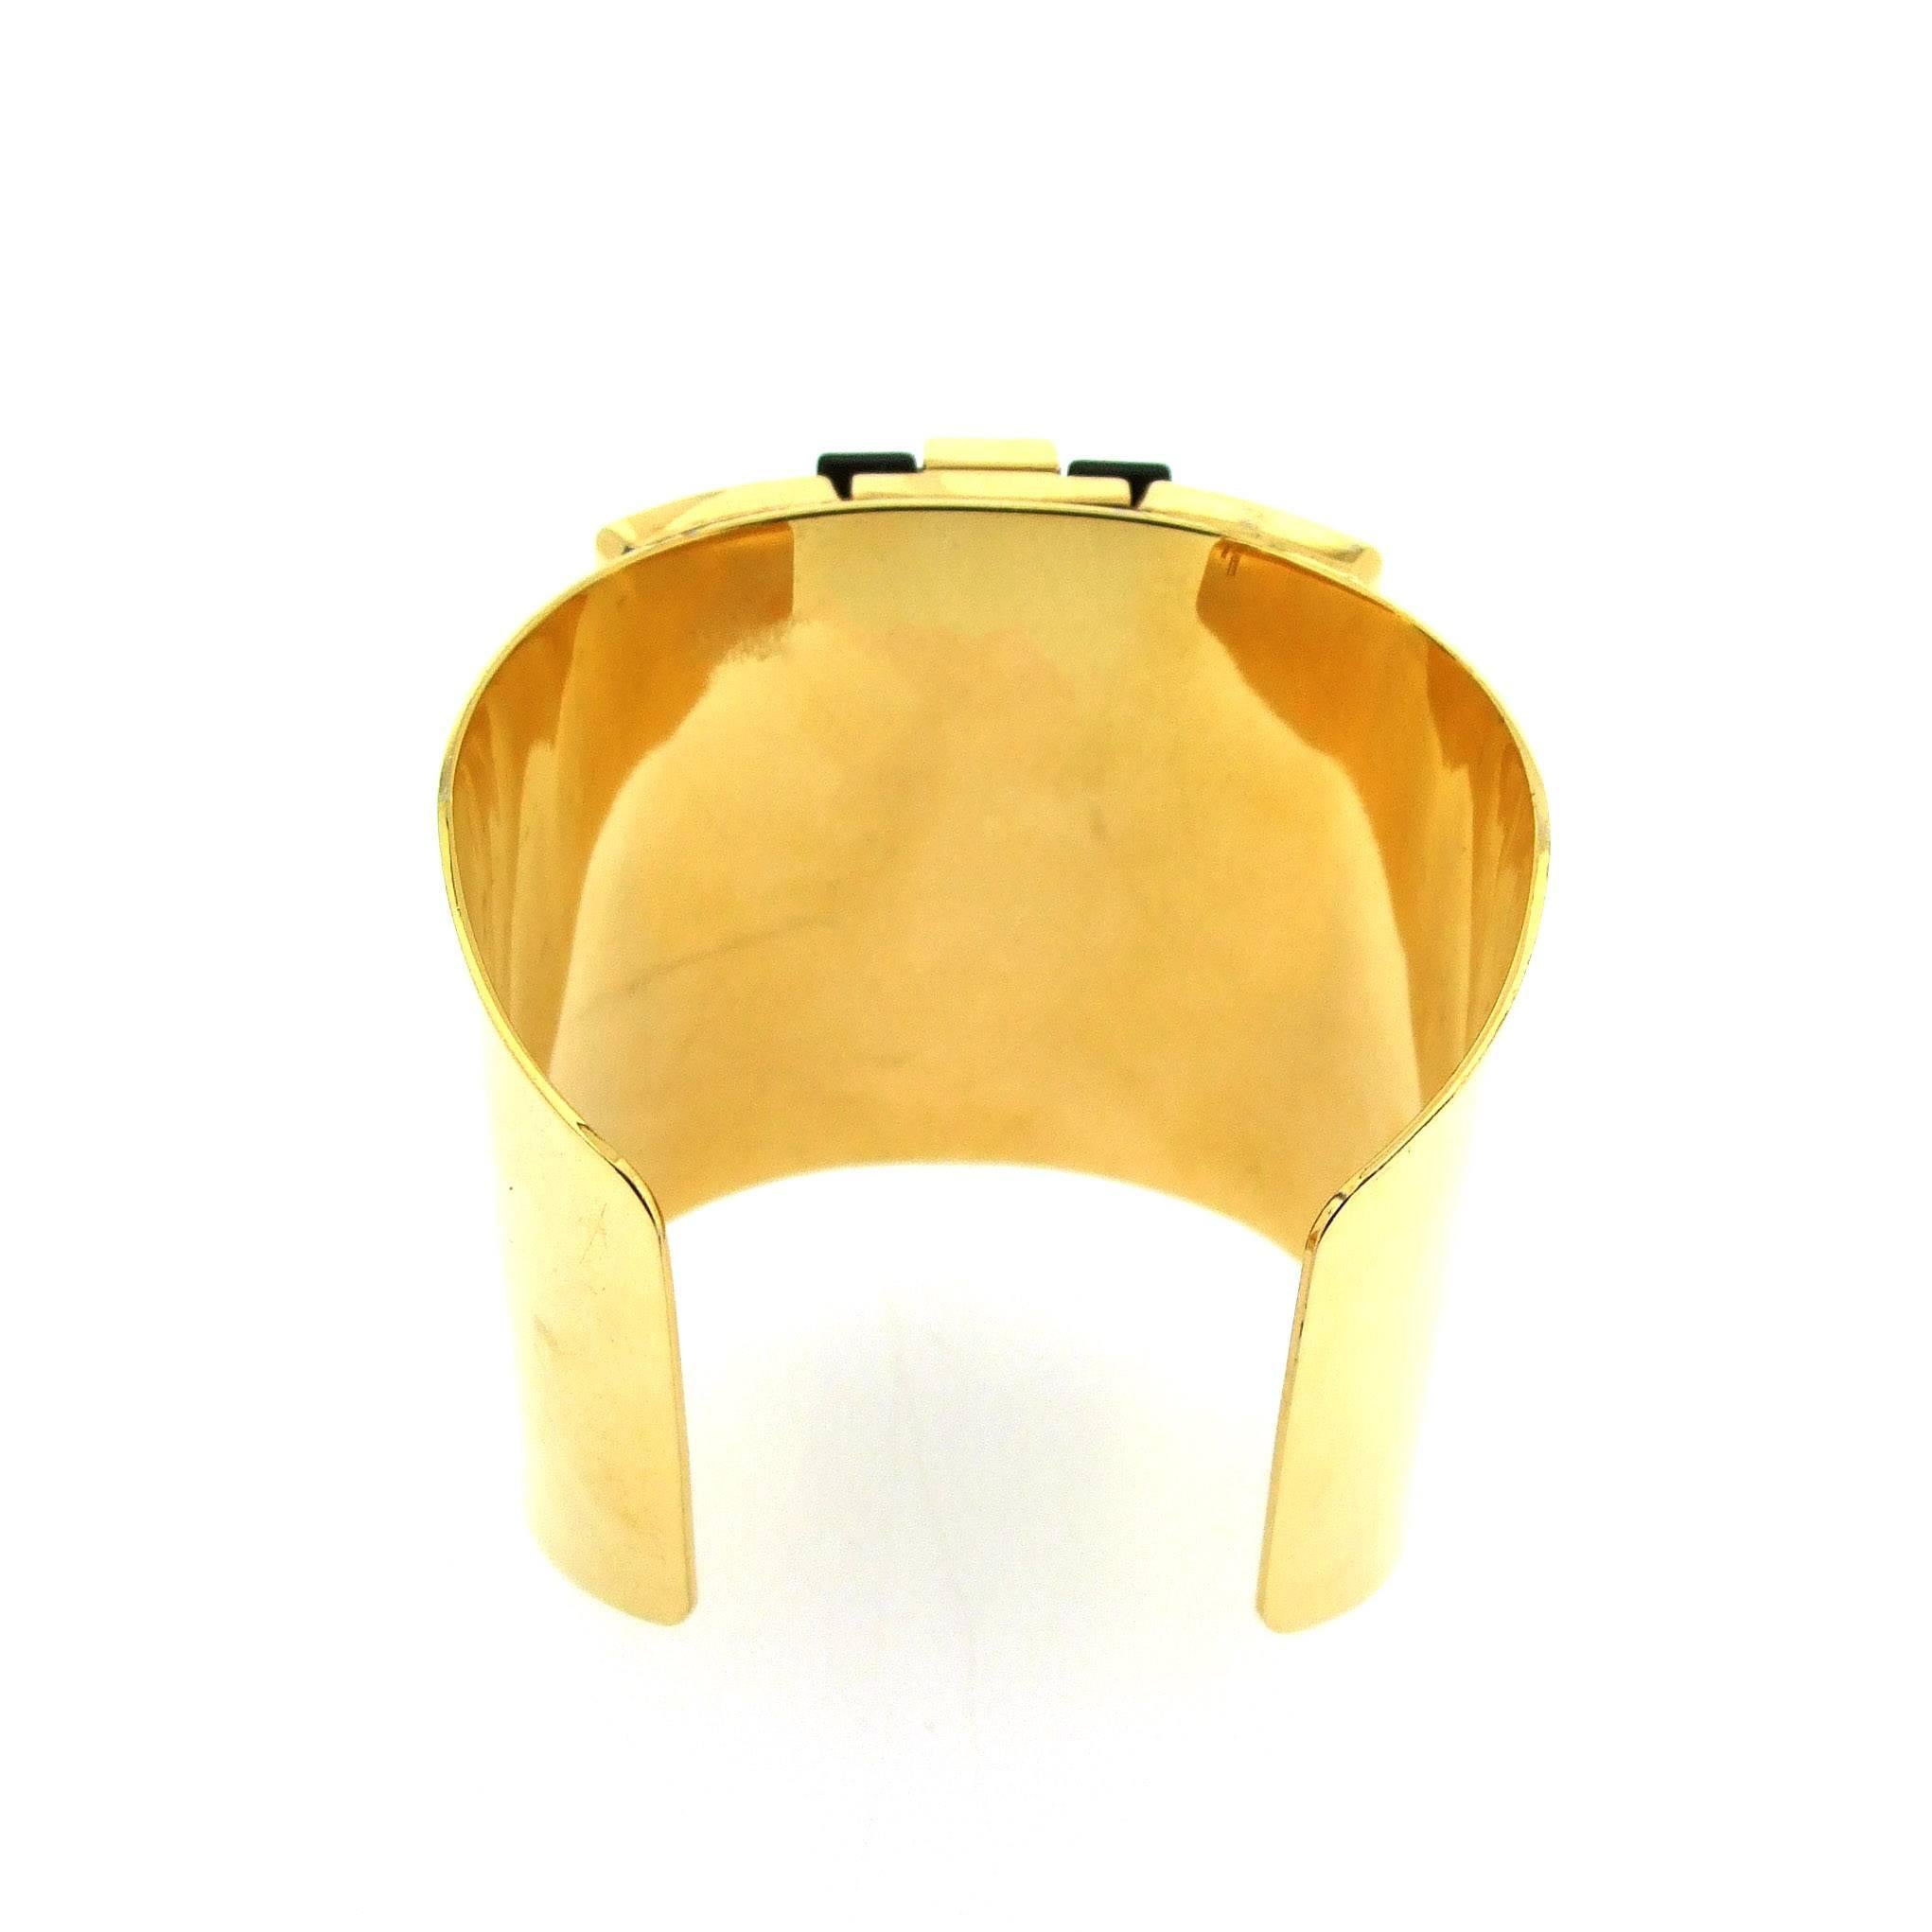 Gold Art Deco Cuff Bracelet by Emilio Pucci  In Fair Condition For Sale In London, GB